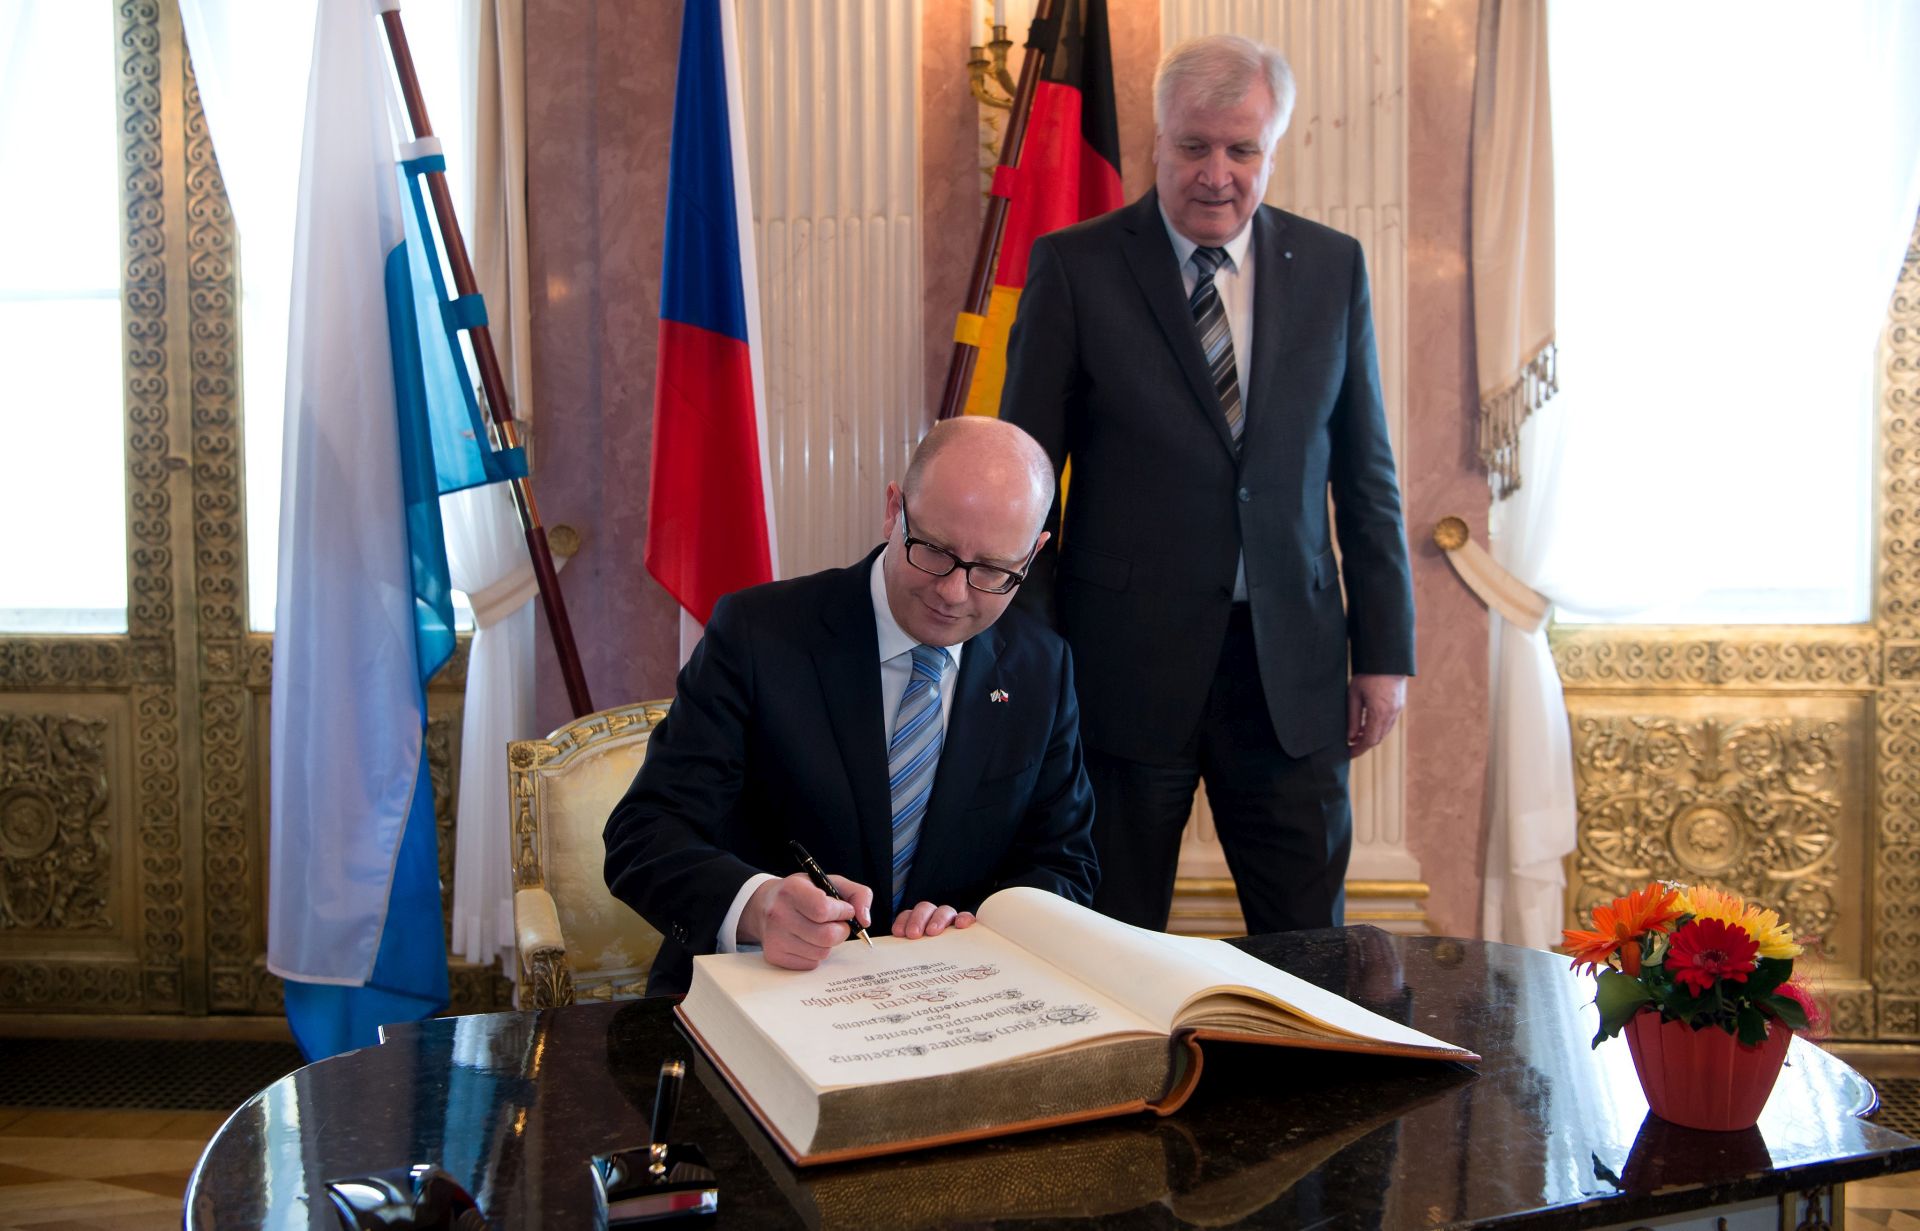 epa05204422 Bohuslav Sobotka (L), Prime Minister of the Czech Republic, signs the guestbook of the Bavarian state government, with Horst Seehofer, Premier of the German state of Bavaria, looking on, in Munich, Germany, 10 March 2016. Sobotka is on a two-day visit to Bavaria.   EPA/SVEN HOPPE